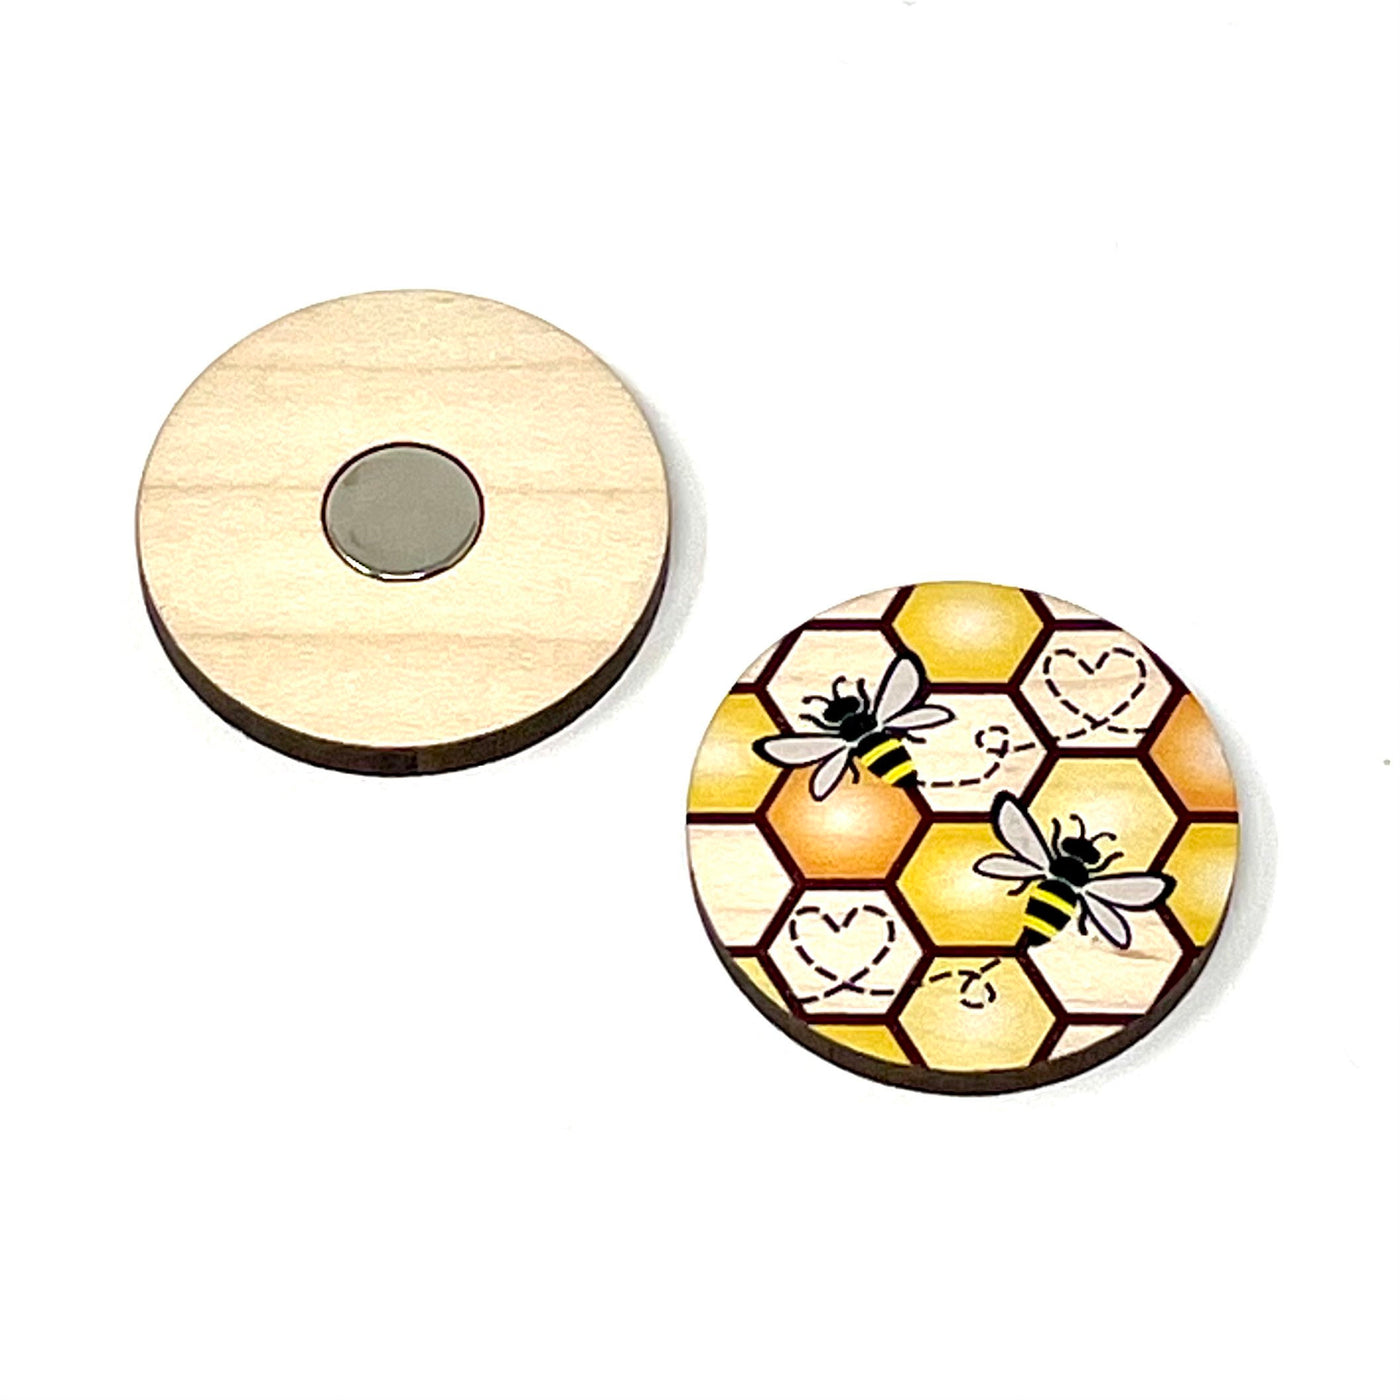 Reversible Bee Needle Minder Magnet with tin - Cross stitch / embroidery gift